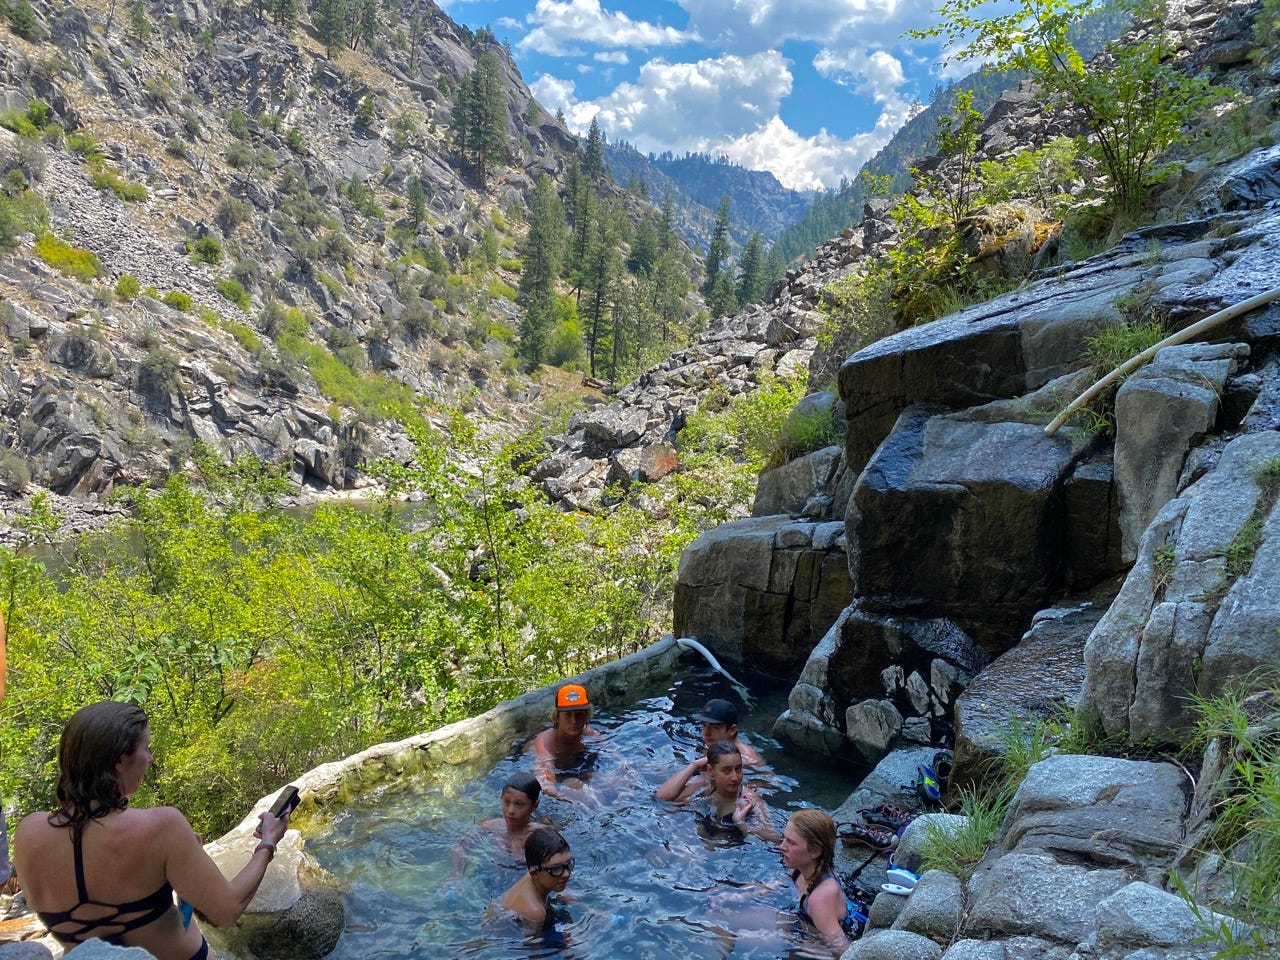 <p>I've been to Idaho twice and spent a total of about three weeks crisscrossing the state to go hiking, biking, kayaking, and whitewater rafting. I also explored its hidden hot springs.</p><p>Big City Boise blew me away with excellent food (including the best falafel I've ever had in the US at <a href="http://www.tarbushkitchenidaho.com/">Tarbush Kitchen</a>) and unique museums and historical sites (like the Old Idaho Penitentiary).</p><p>It also has loads of cycling trails and even rafting and tubing along the Boise River, which runs through downtown.</p>